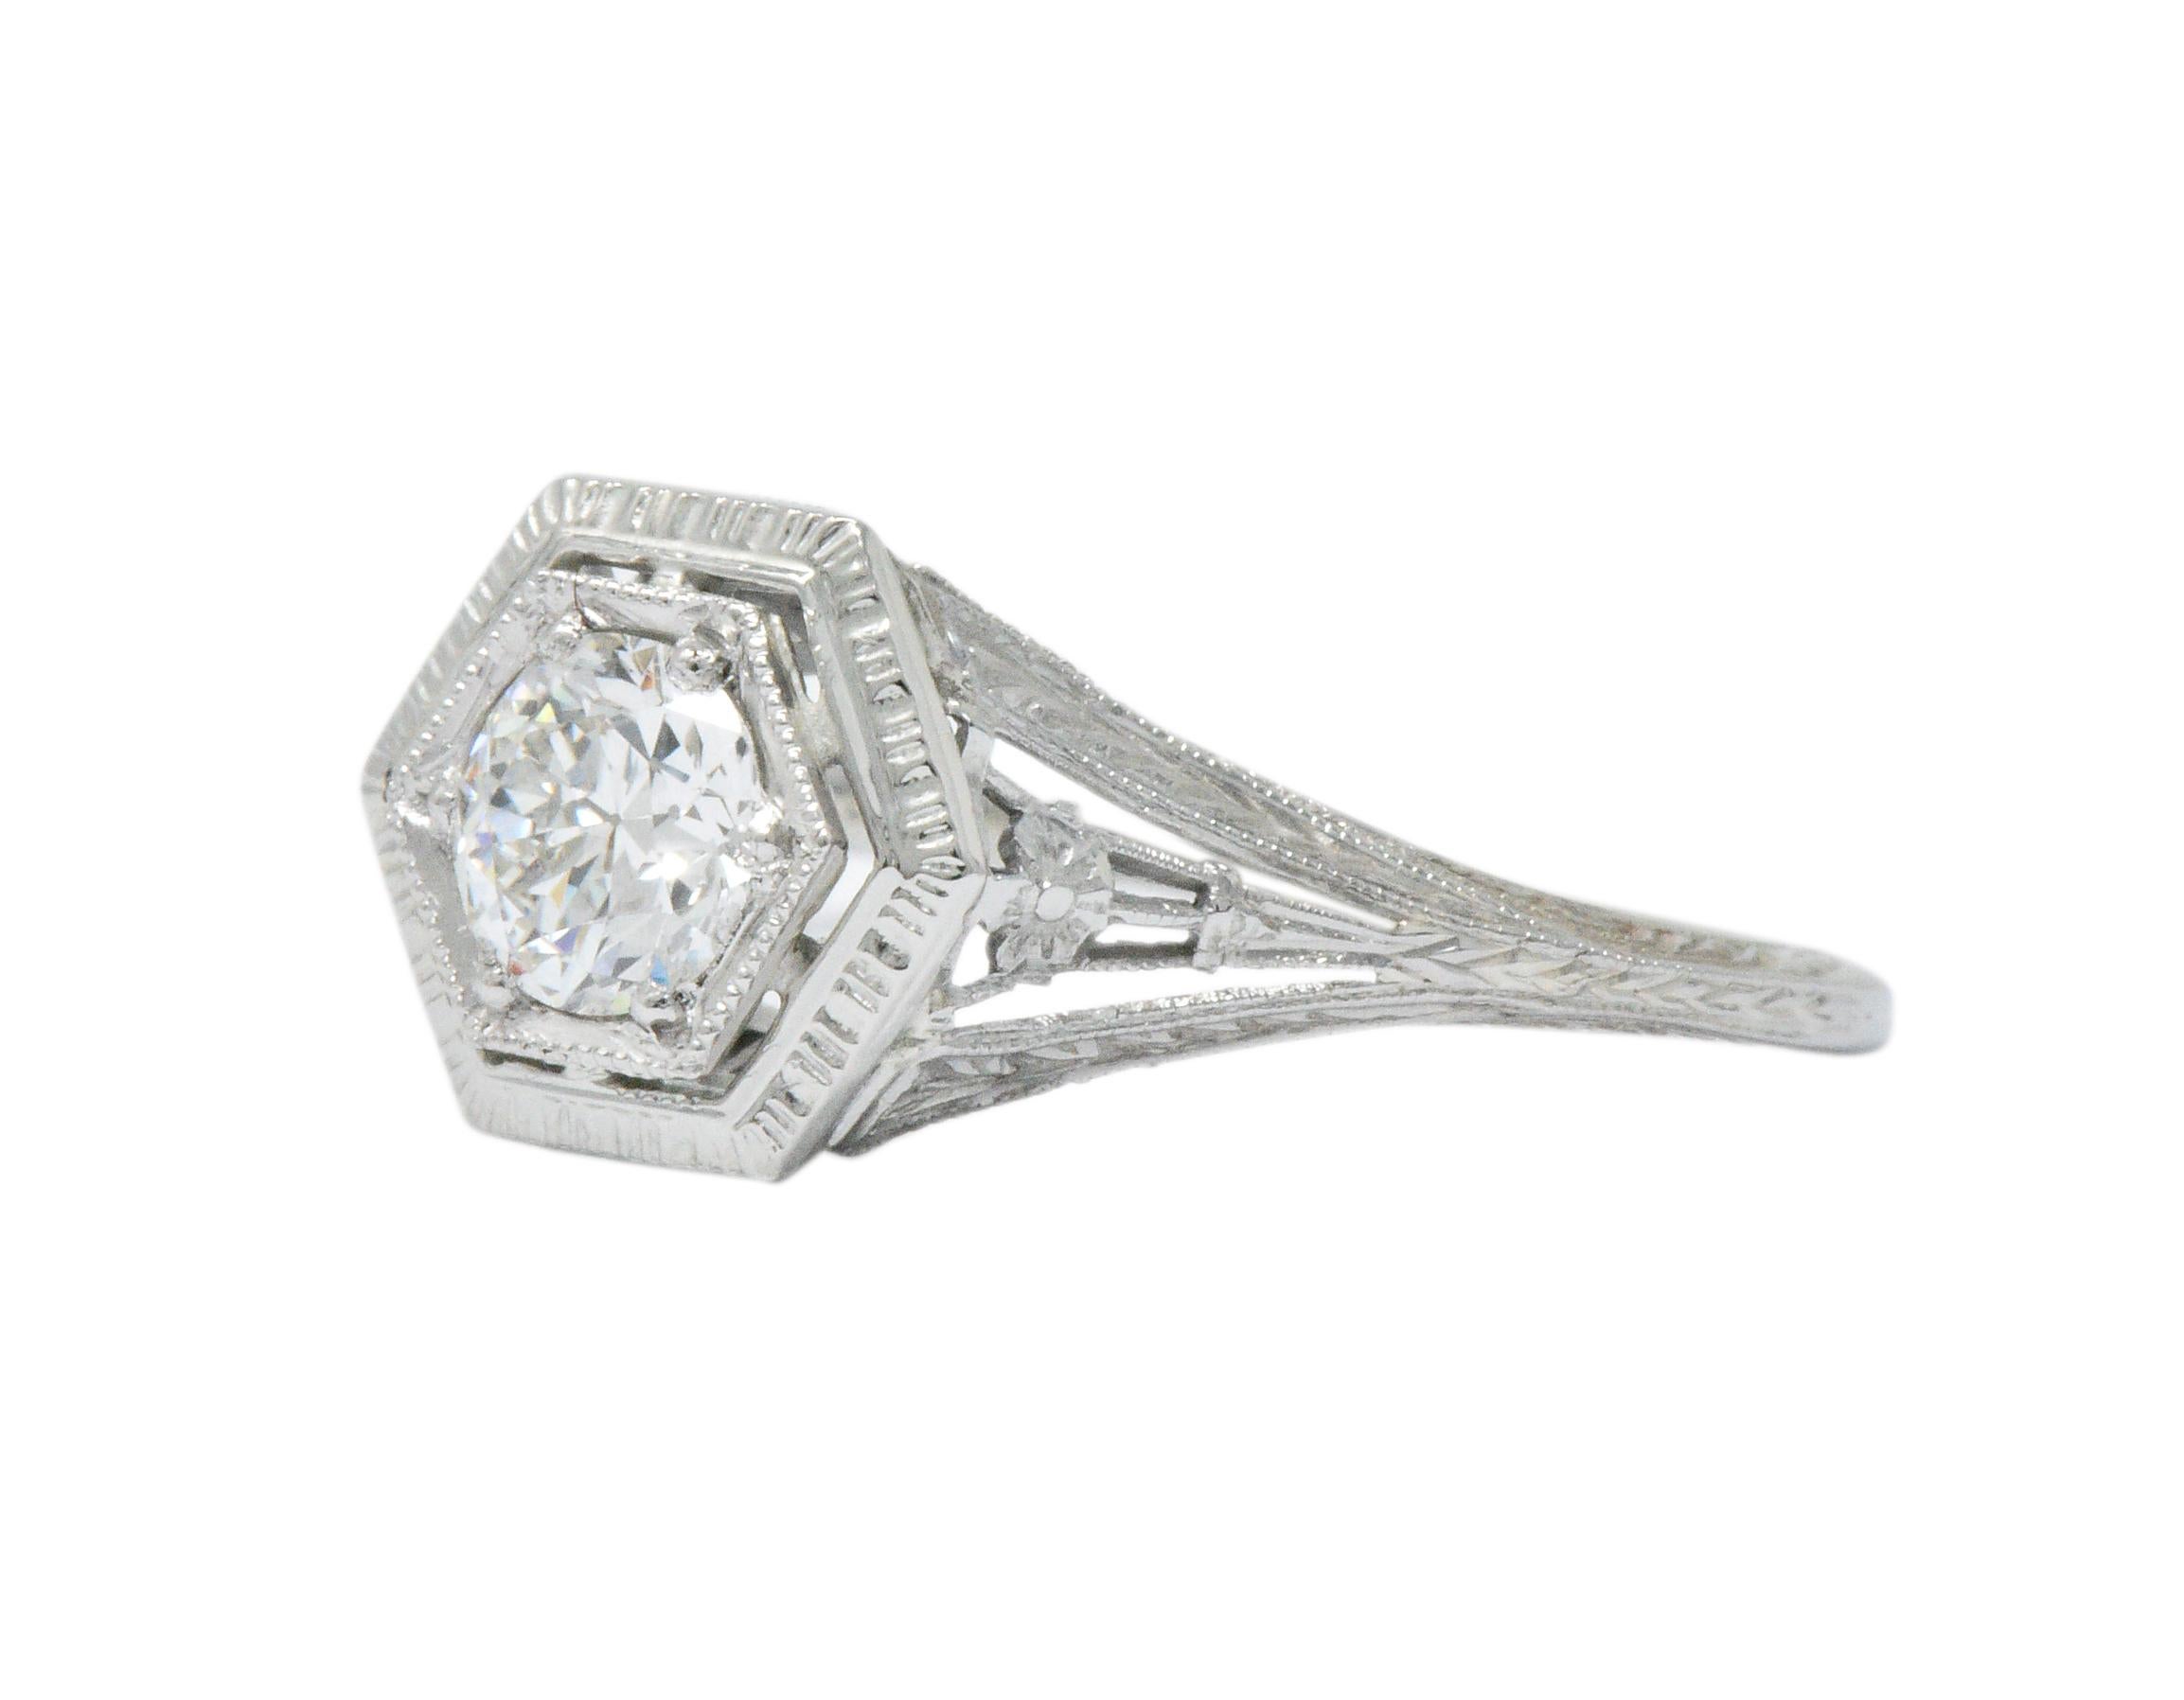 Centering an old European cut diamond weighing 0.51 carat, K color with VS clarity

Bead set in a milgrain octagonal head echoed by an octagonal surround featuring deeply engraved details

Flanked by delicately split shoulders decorated with a